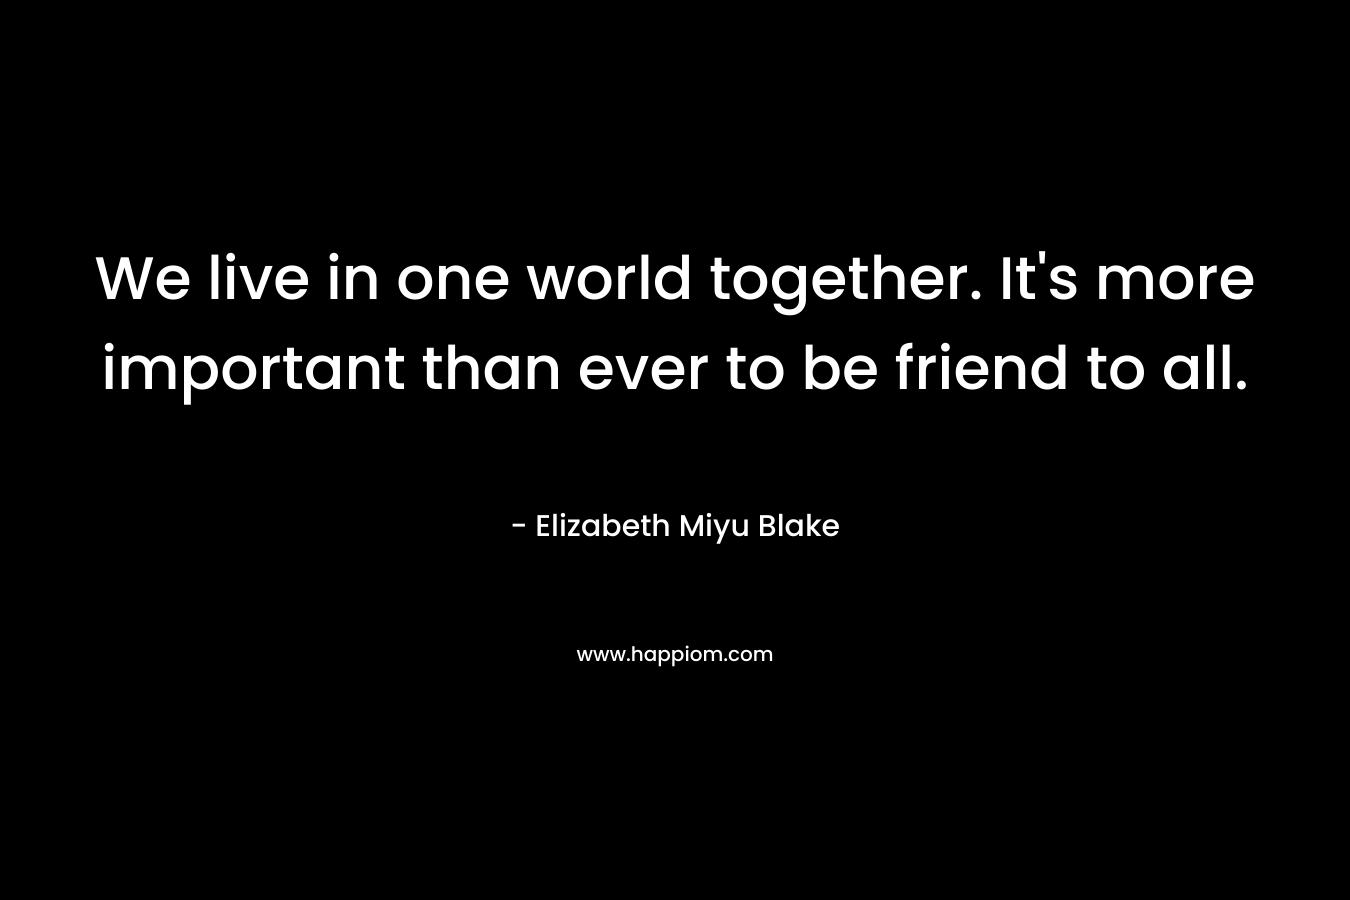 We live in one world together. It's more important than ever to be friend to all.